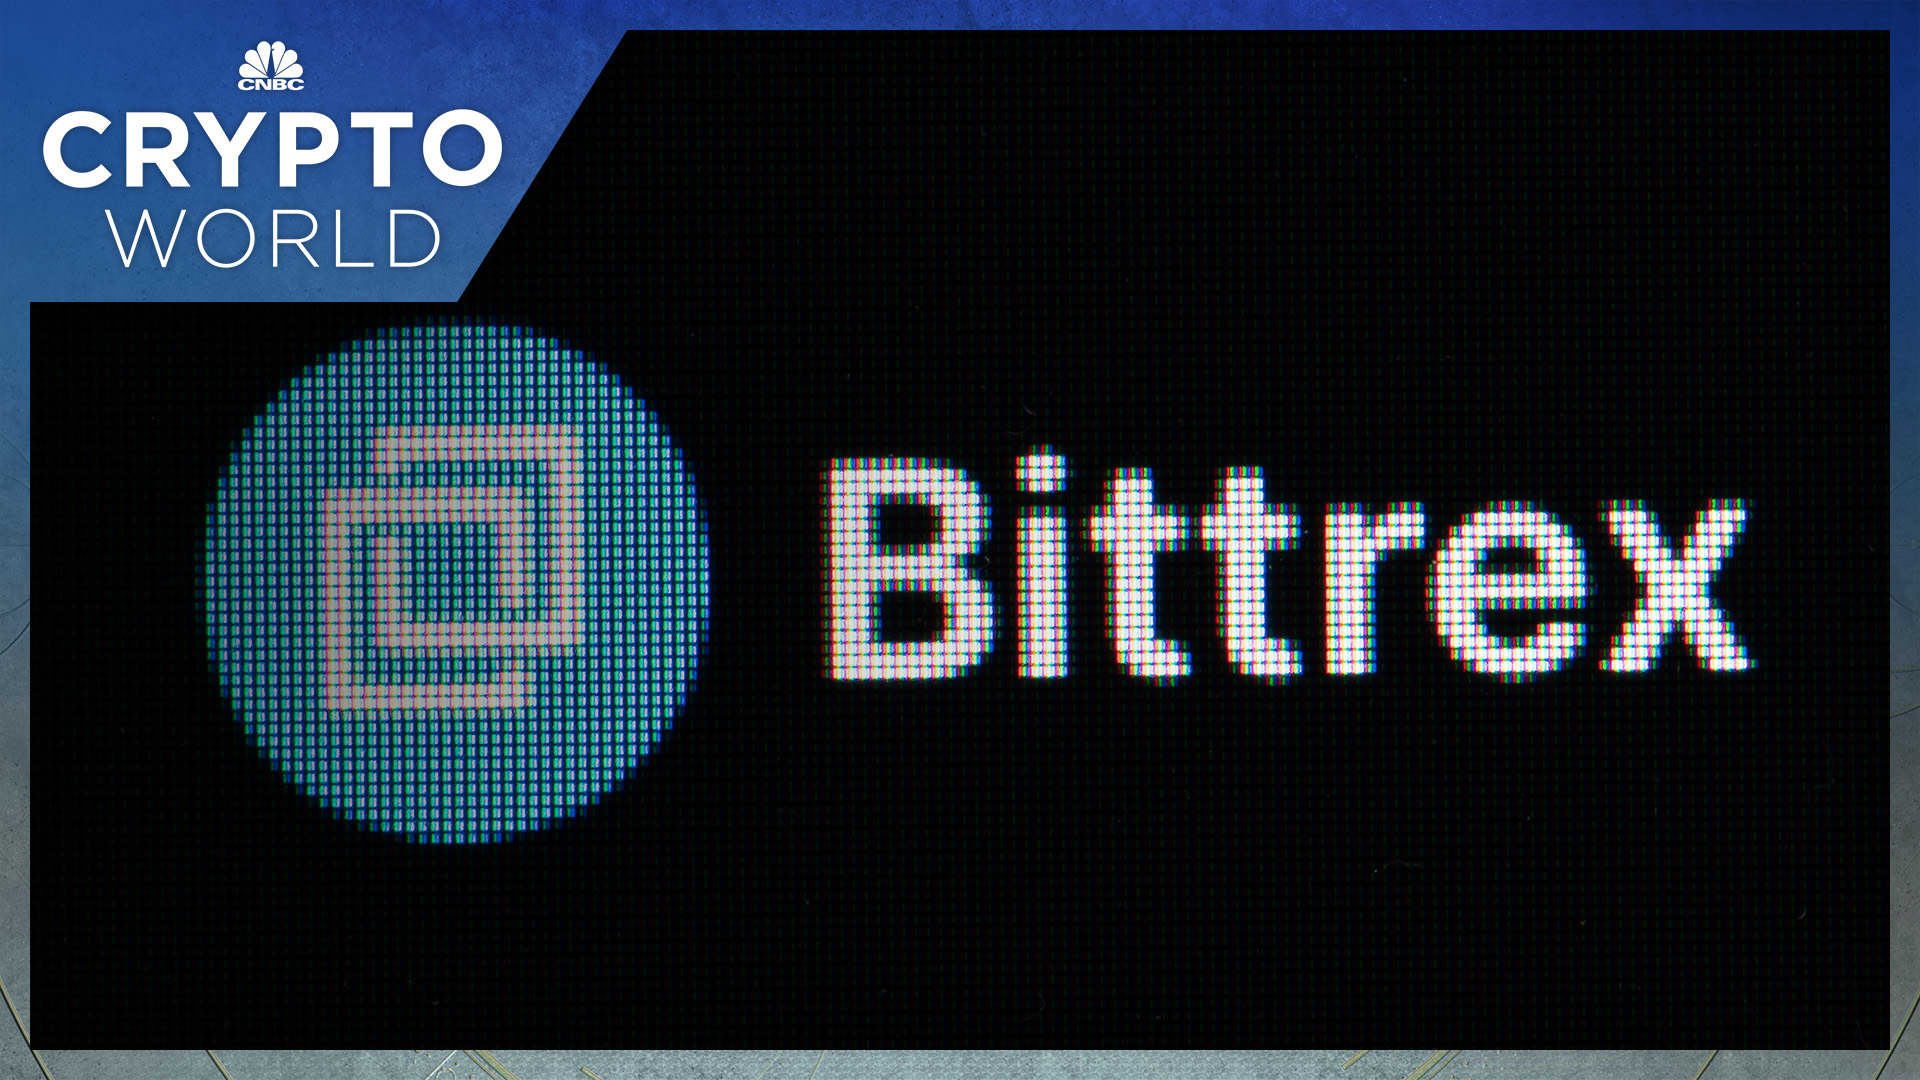 SEC charges Bittrex with operating unregistered securities exchange | Business Insurance